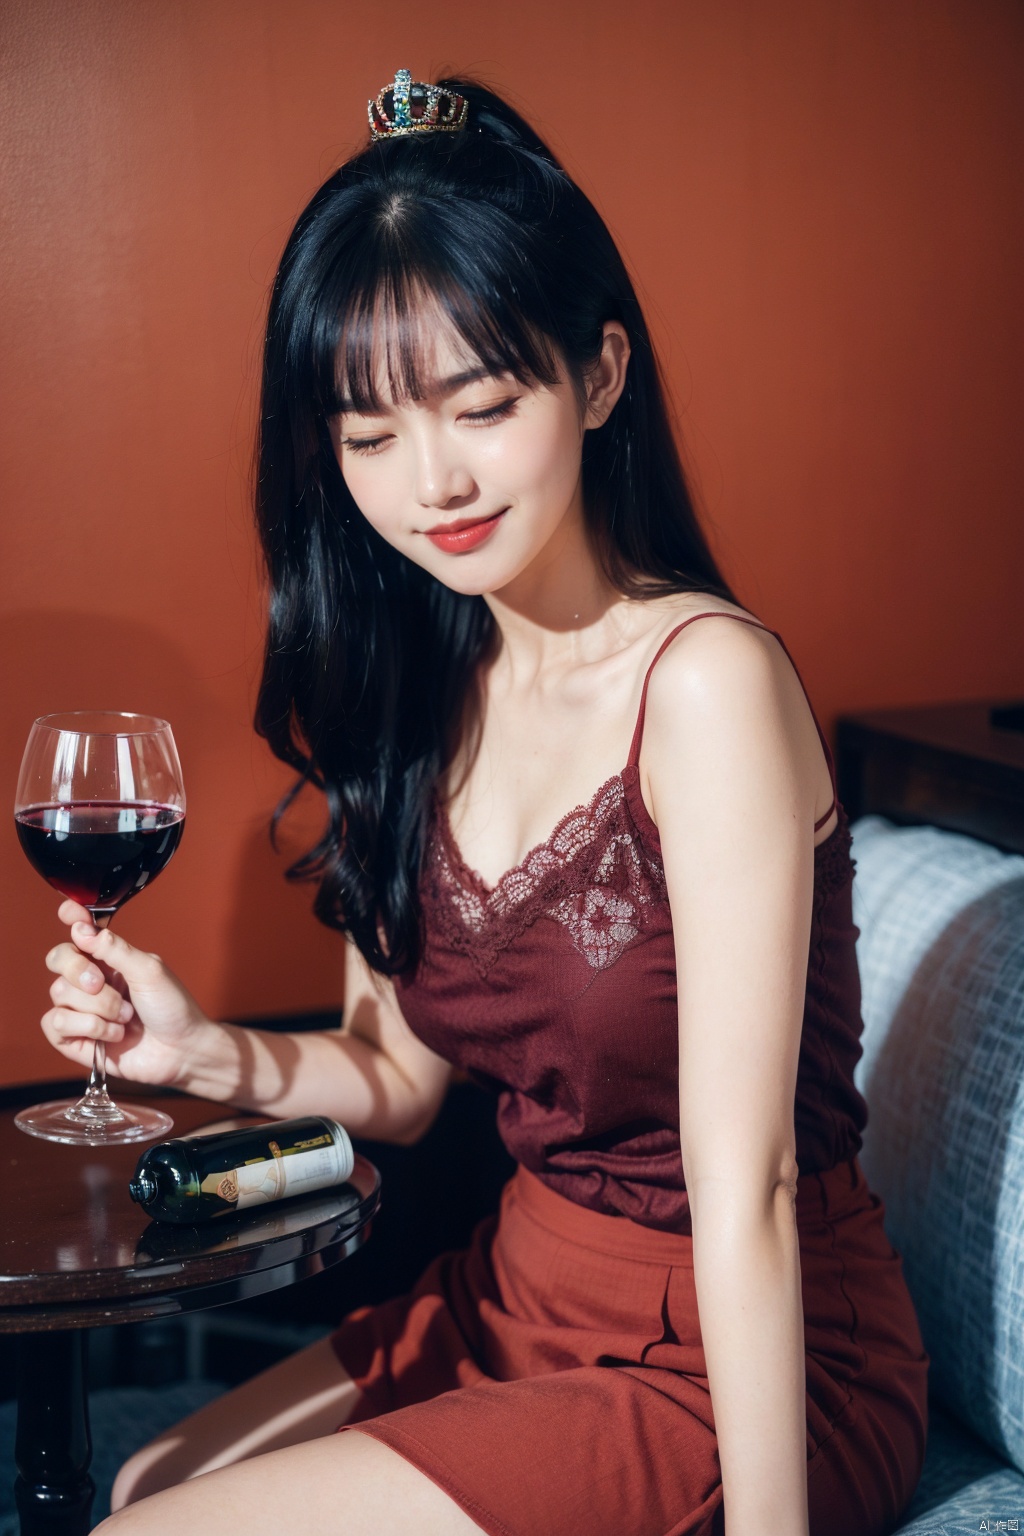  1girl,stars in the eyes,pure girl,(full body:0.5),angle,contour deepening,cinematic angle,Goddess,Crown,1girl, solo, long hair, smile, black hair, holding, closed eyes, english text, cup, holding cup, alcohol, drinking glass, wine glass, wine,Red background, red camisole skirt